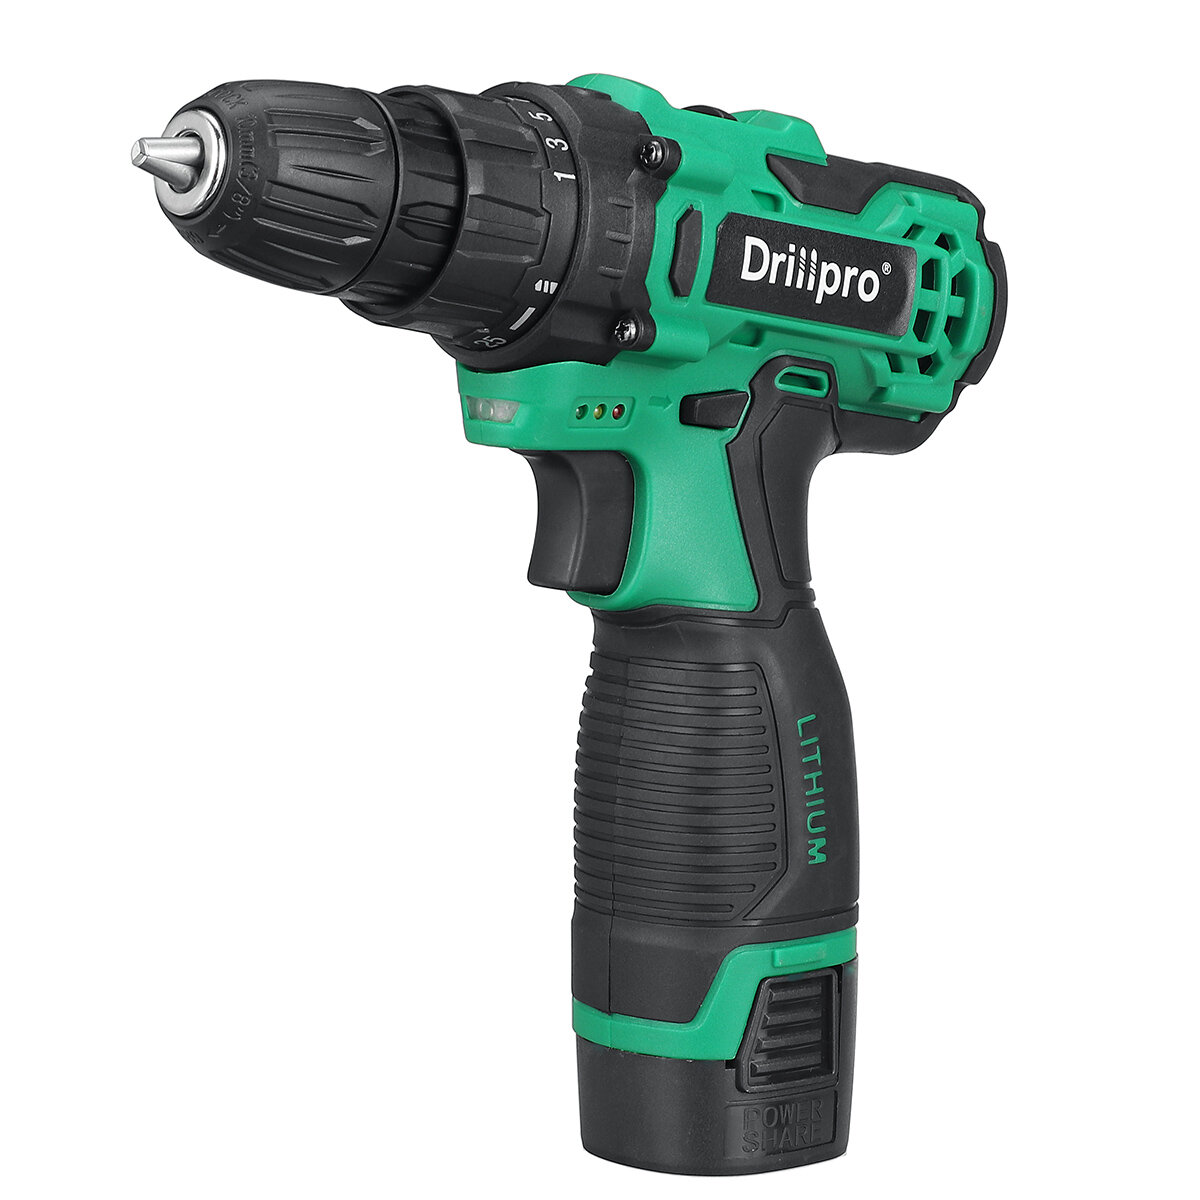 Drillpro 18V 1500mAh Cordless Drill Rechargeable 2 Speed Electric Drill W/ 1 or 2pcs Battery